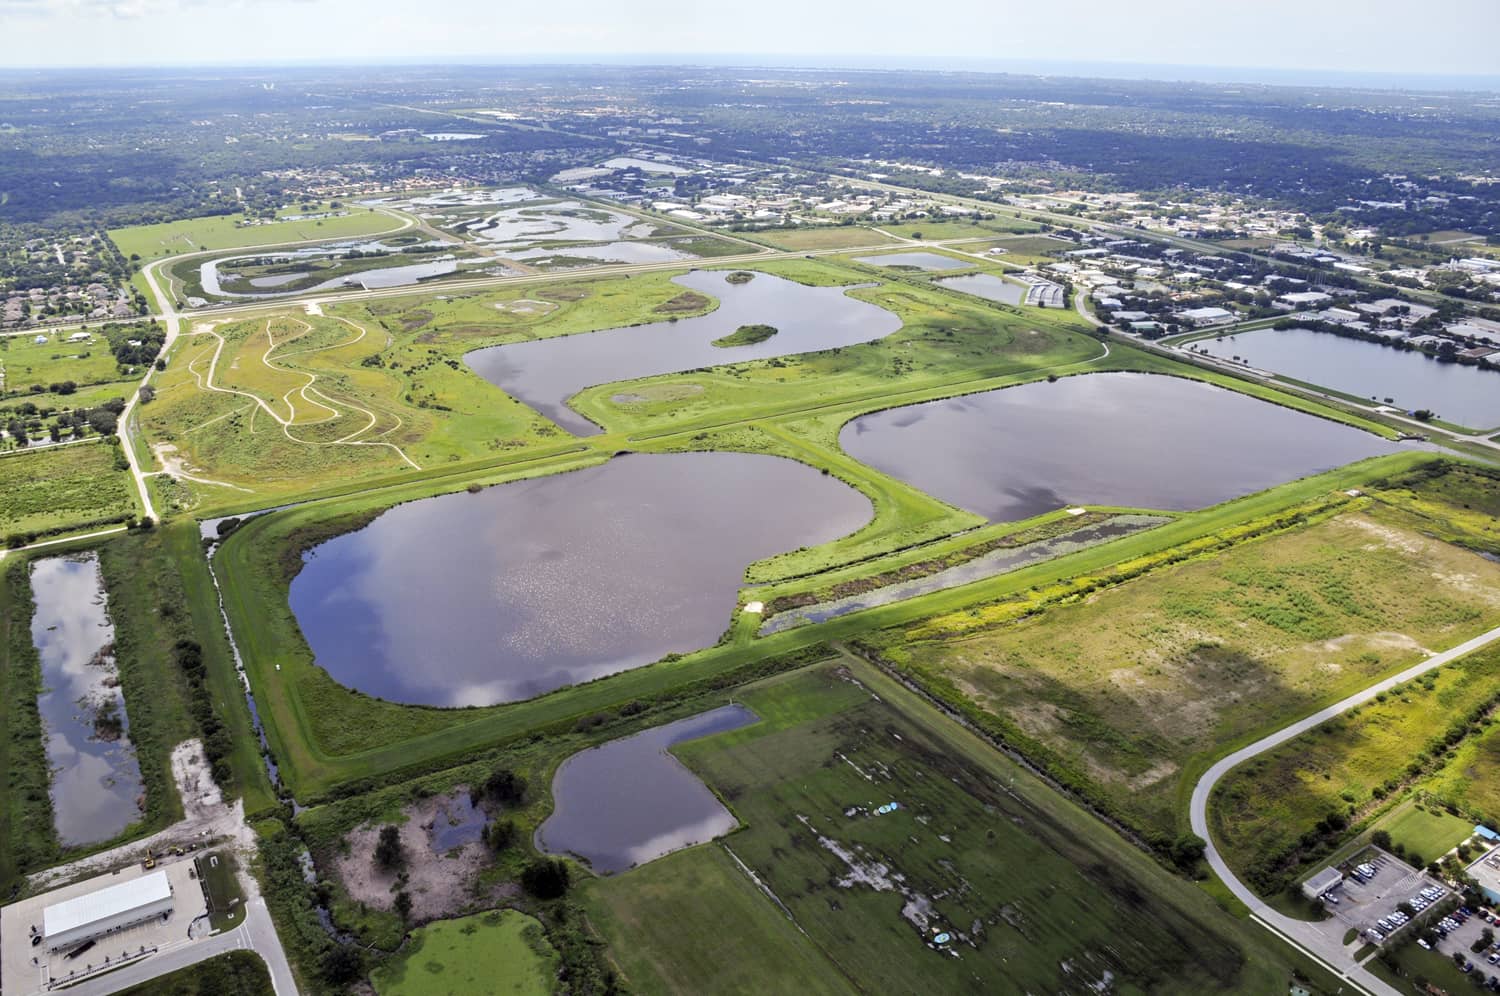 Kimley-Horn provided environmental and engineering services for Celery Fields in Sarasota County.